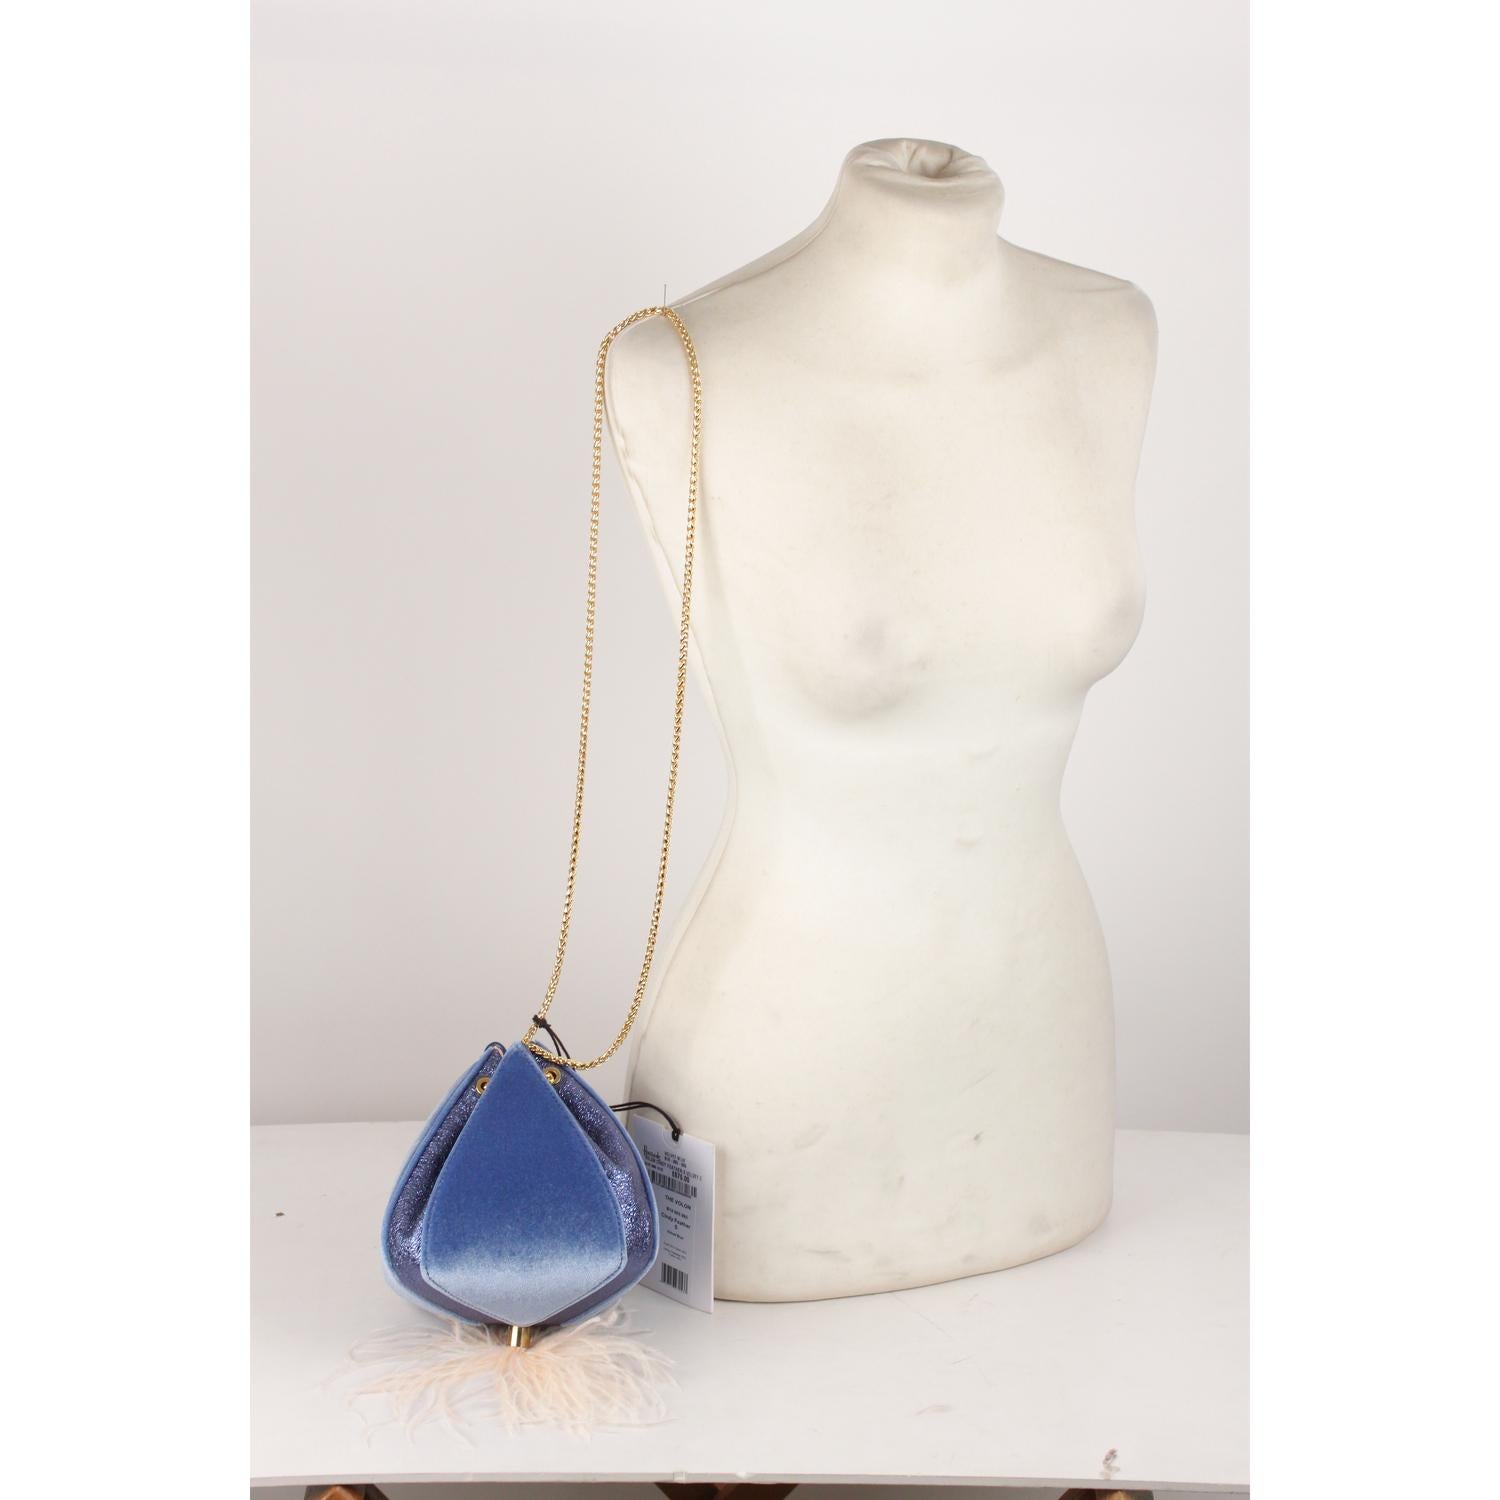 Beautiful THE VOLON 'Cindy' evening bag in blue velvet with metallic blue textured leather. Inspired by Cinderella's pumpkin carriage, the bag features off-white ostrich feather detail on the bottom. Gold metal double adjustable shoulder chain